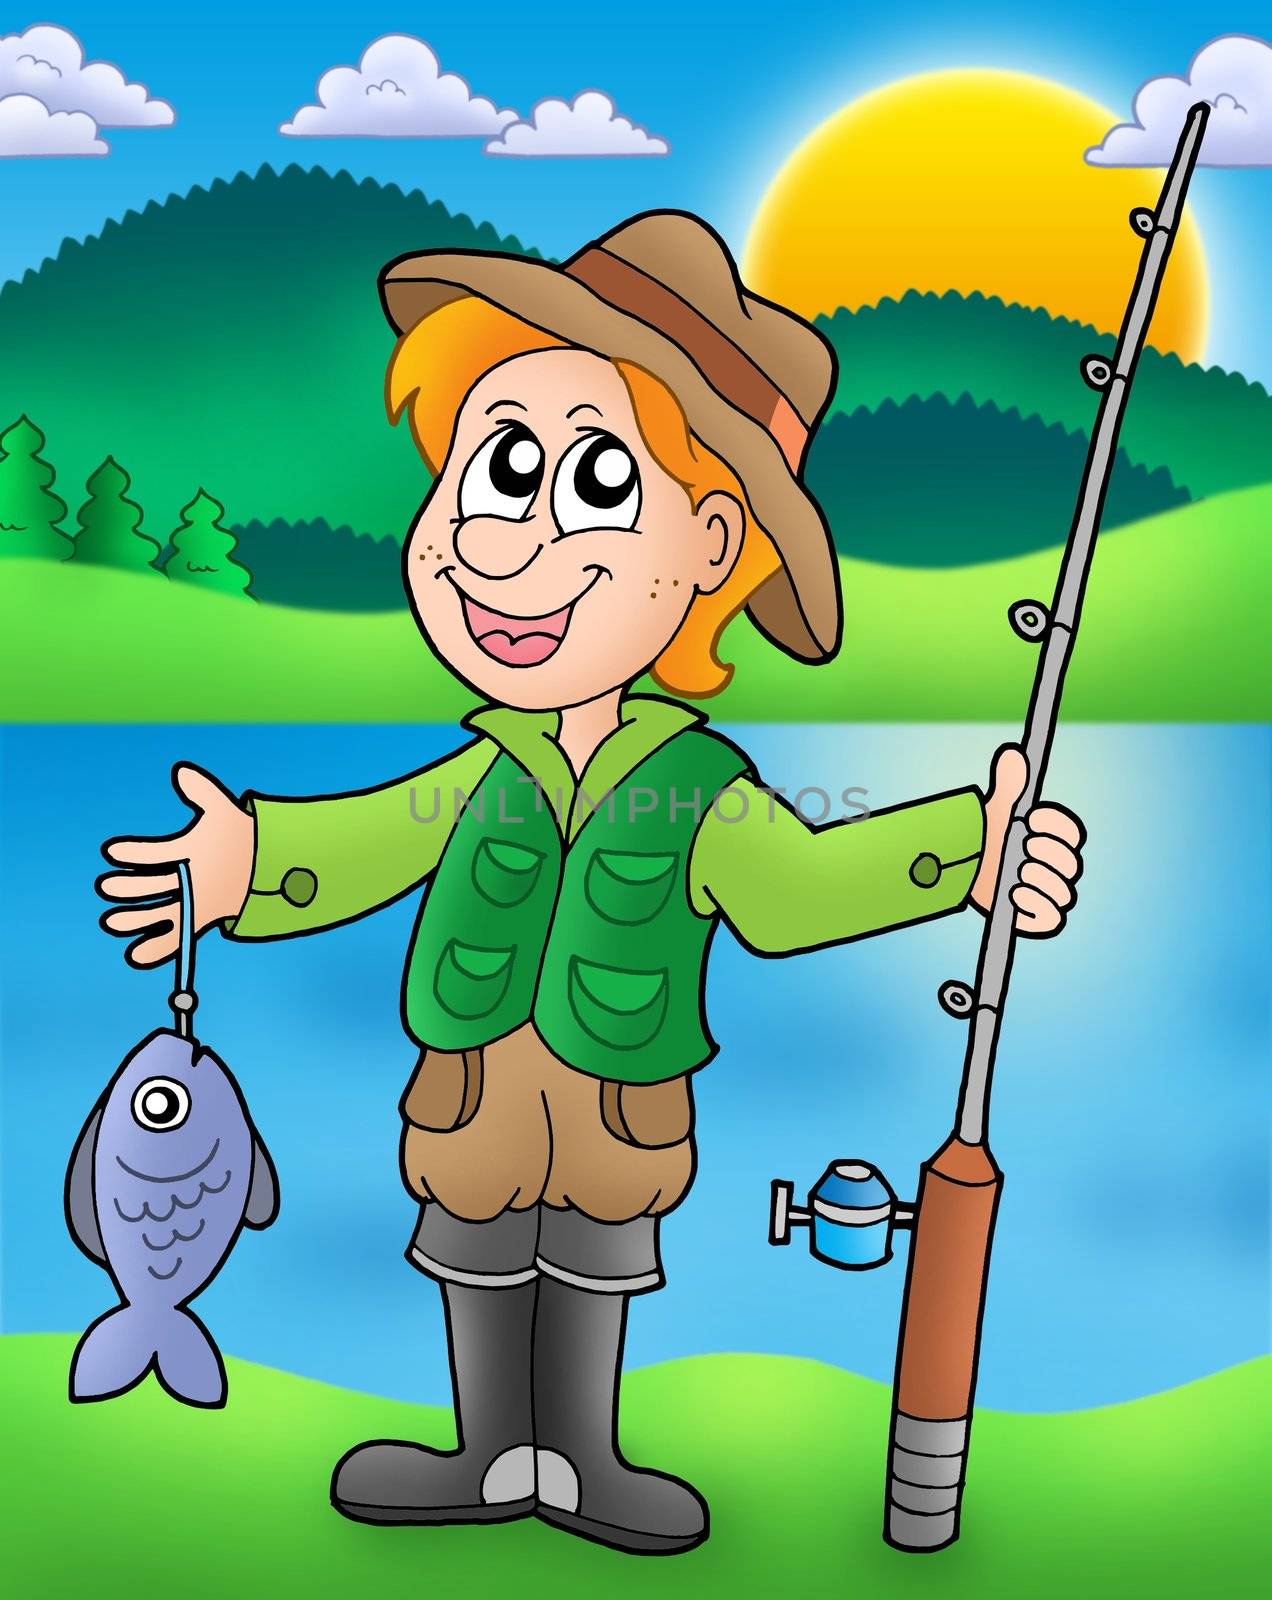 Cartoon fisherman with fish by clairev